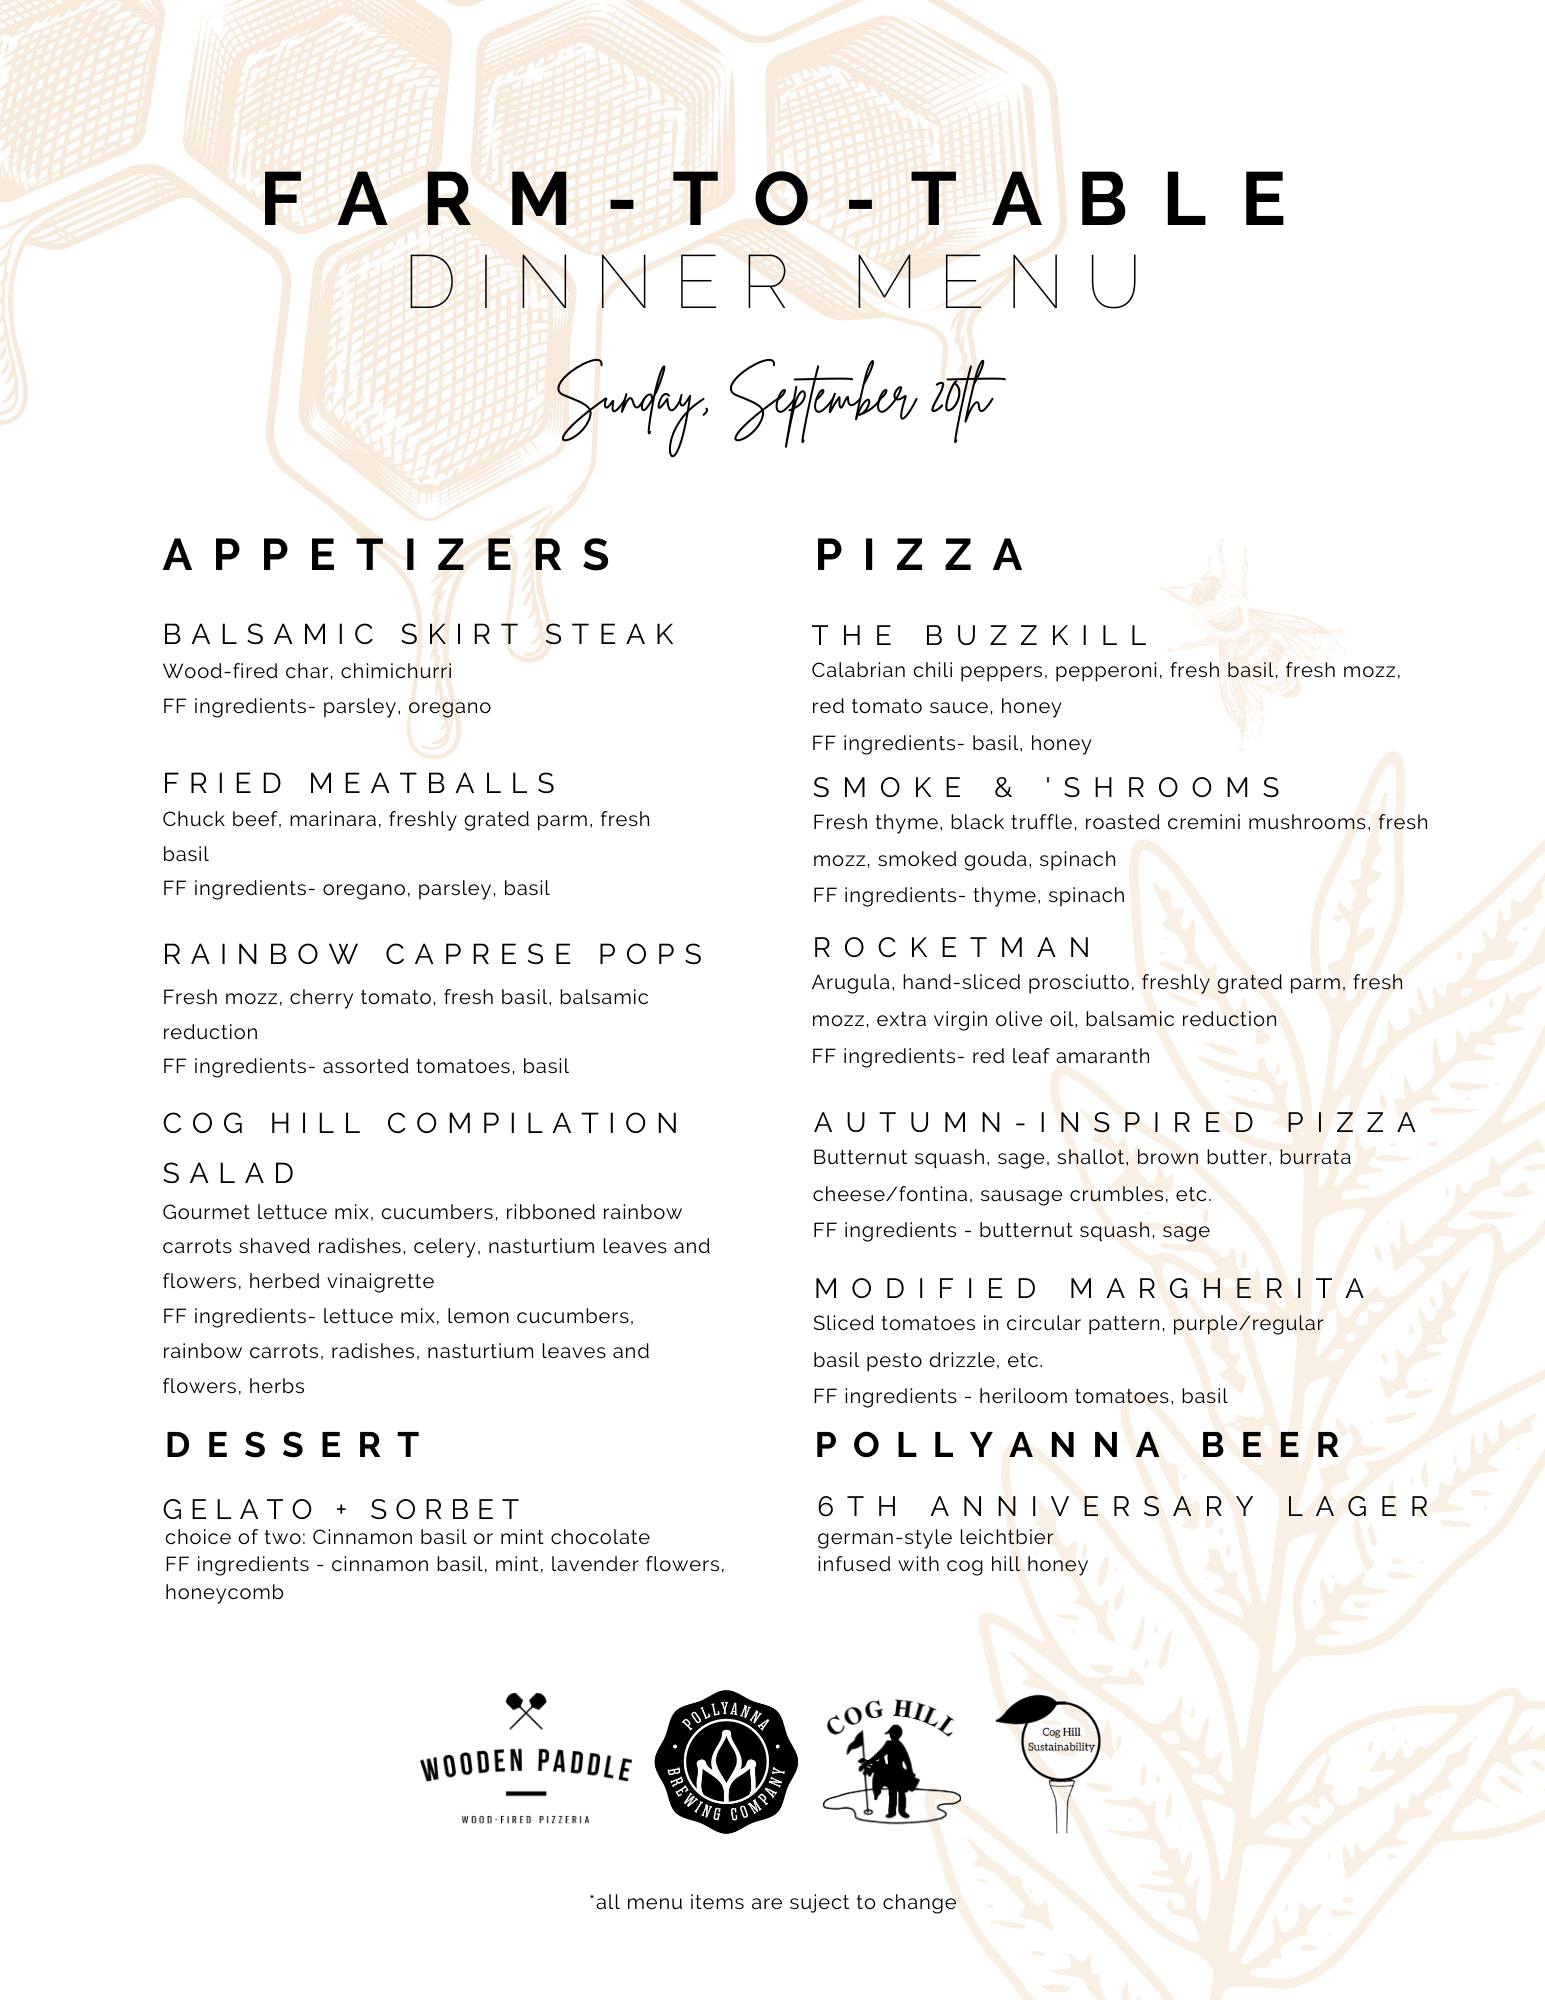 Menu for Cog Hill's Farm to Table dinner